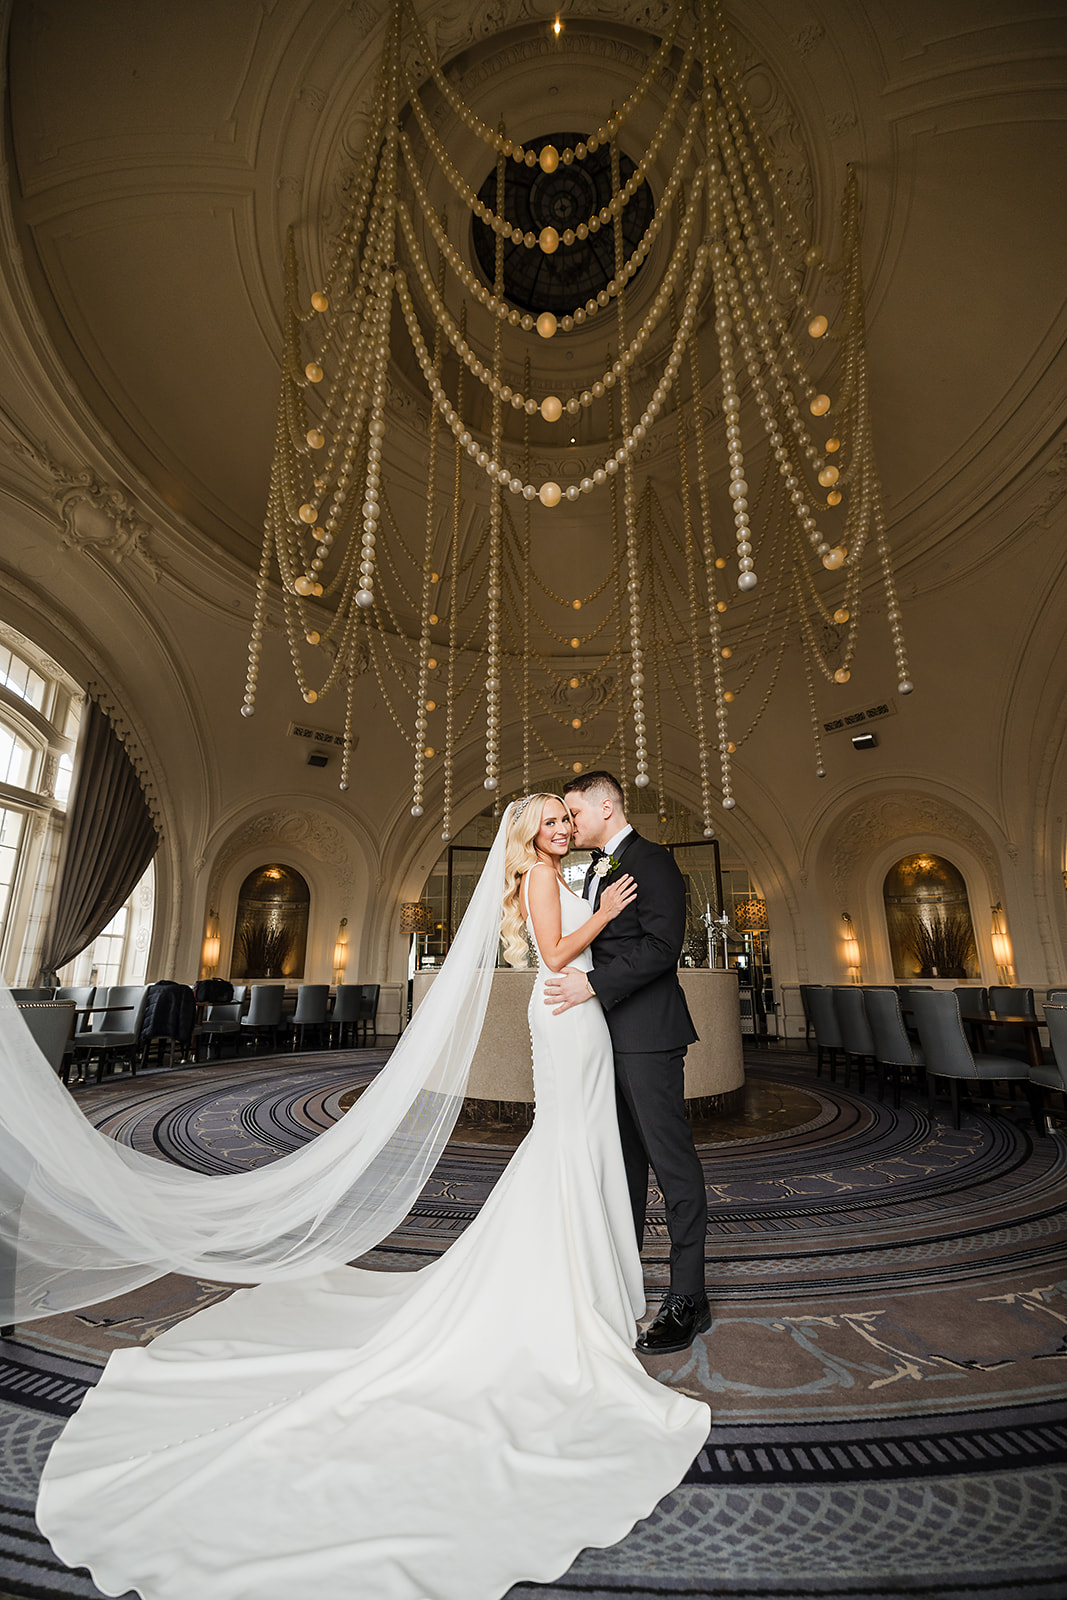 Wedding portraits at the XIX Restaurant with pearl chandelier at Bellevue Hotel Philadelphia